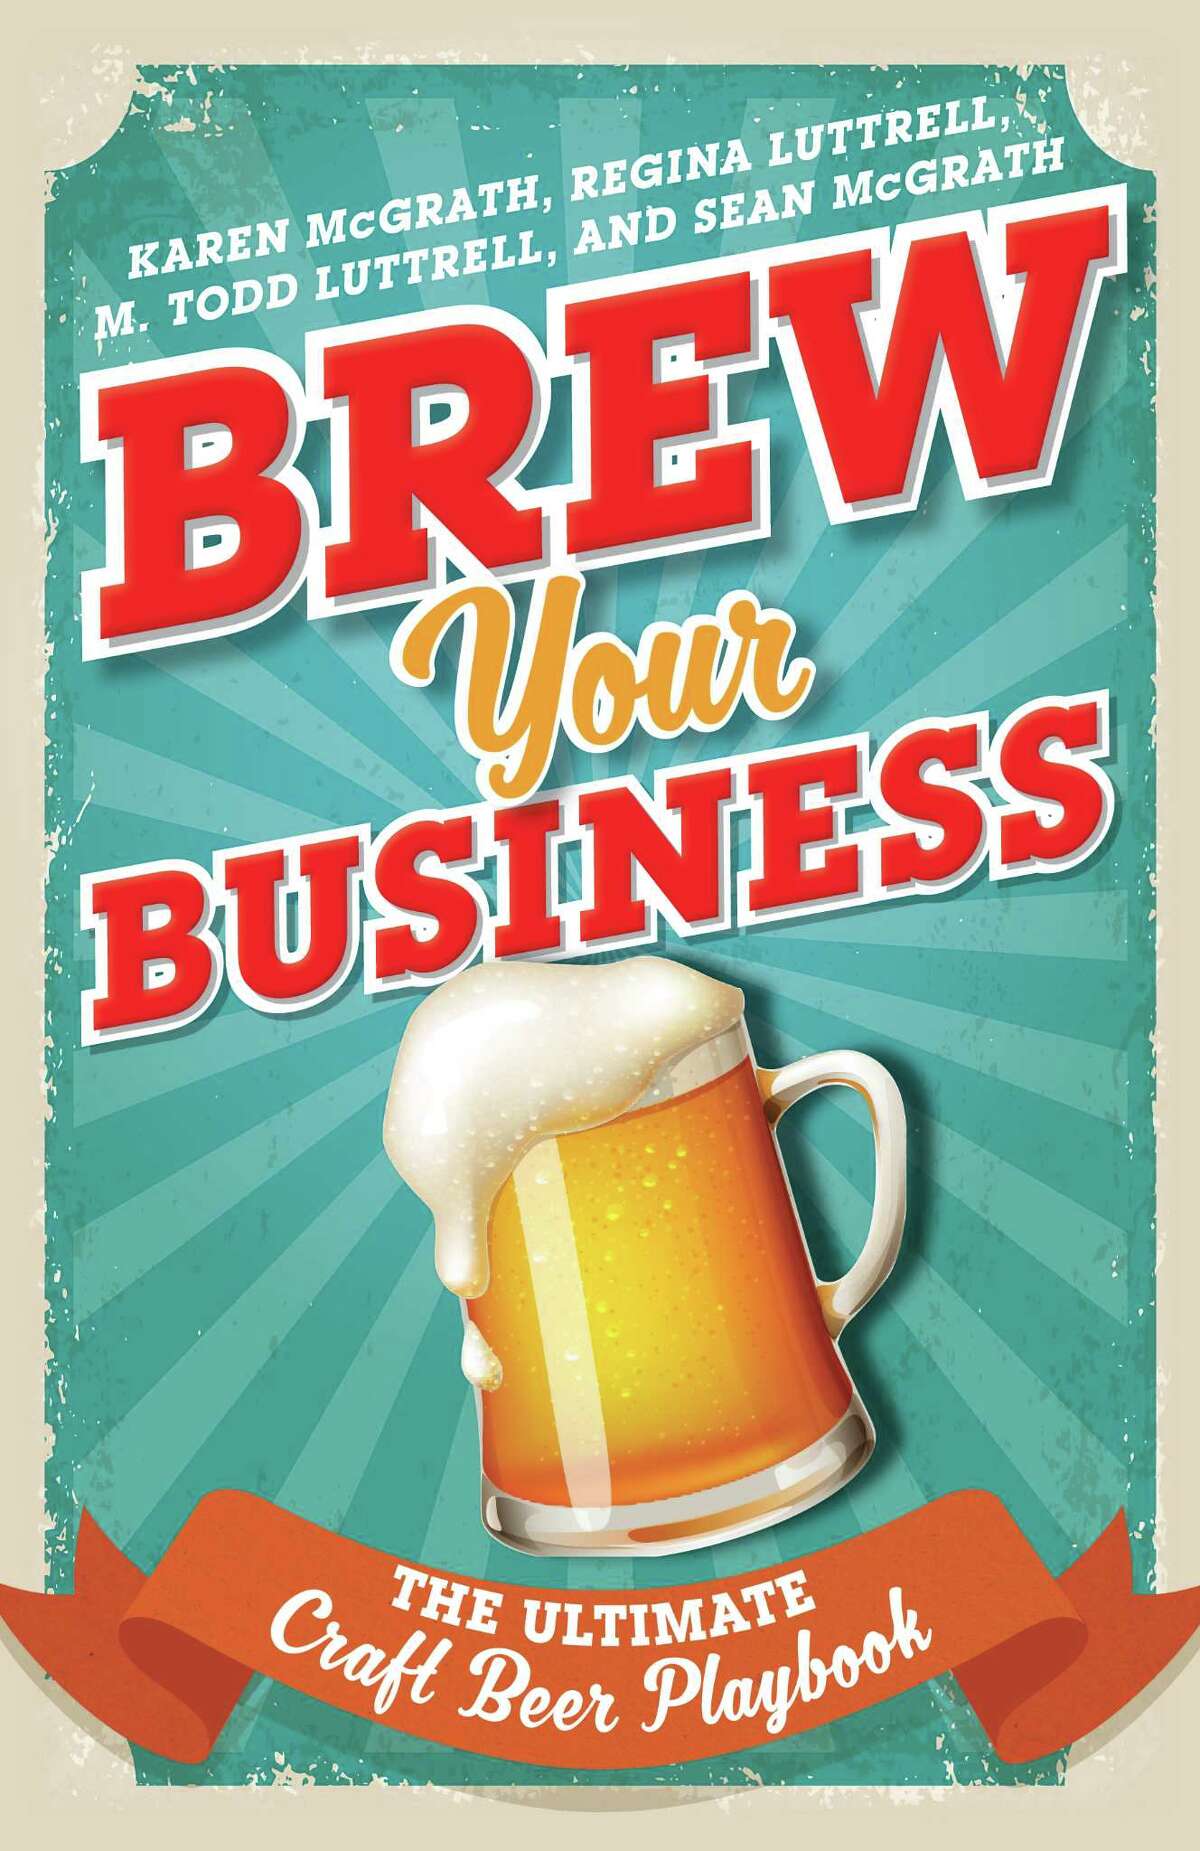 "Brew Your Business," was created by College of Saint Rose professor Karen McGrath, along with three other authors. (Provided | Rowman & Littlefield)